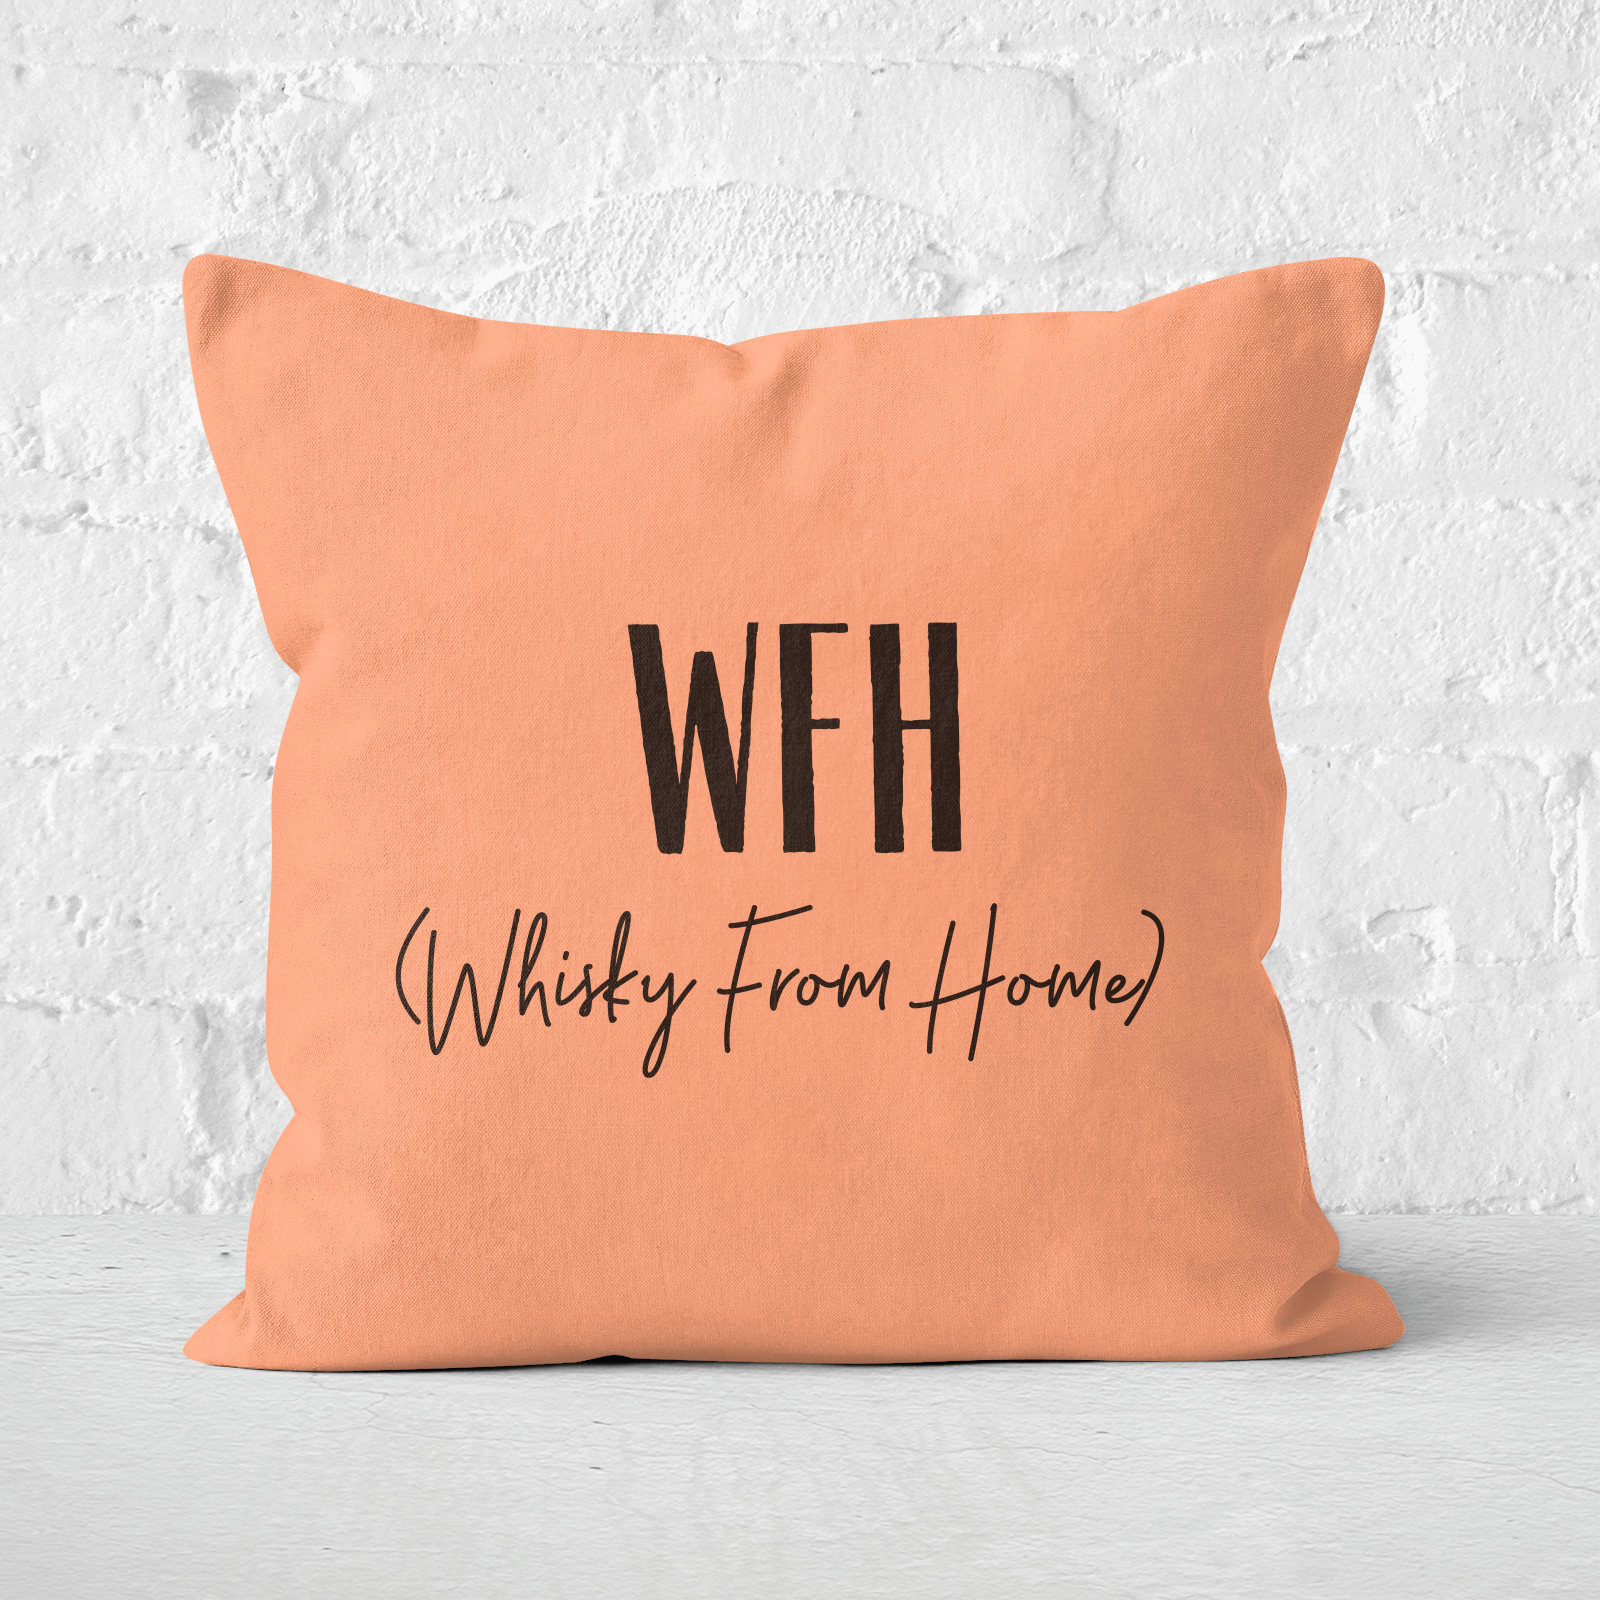 Whisky From Home Square Cushion - 60x60cm - Soft Touch